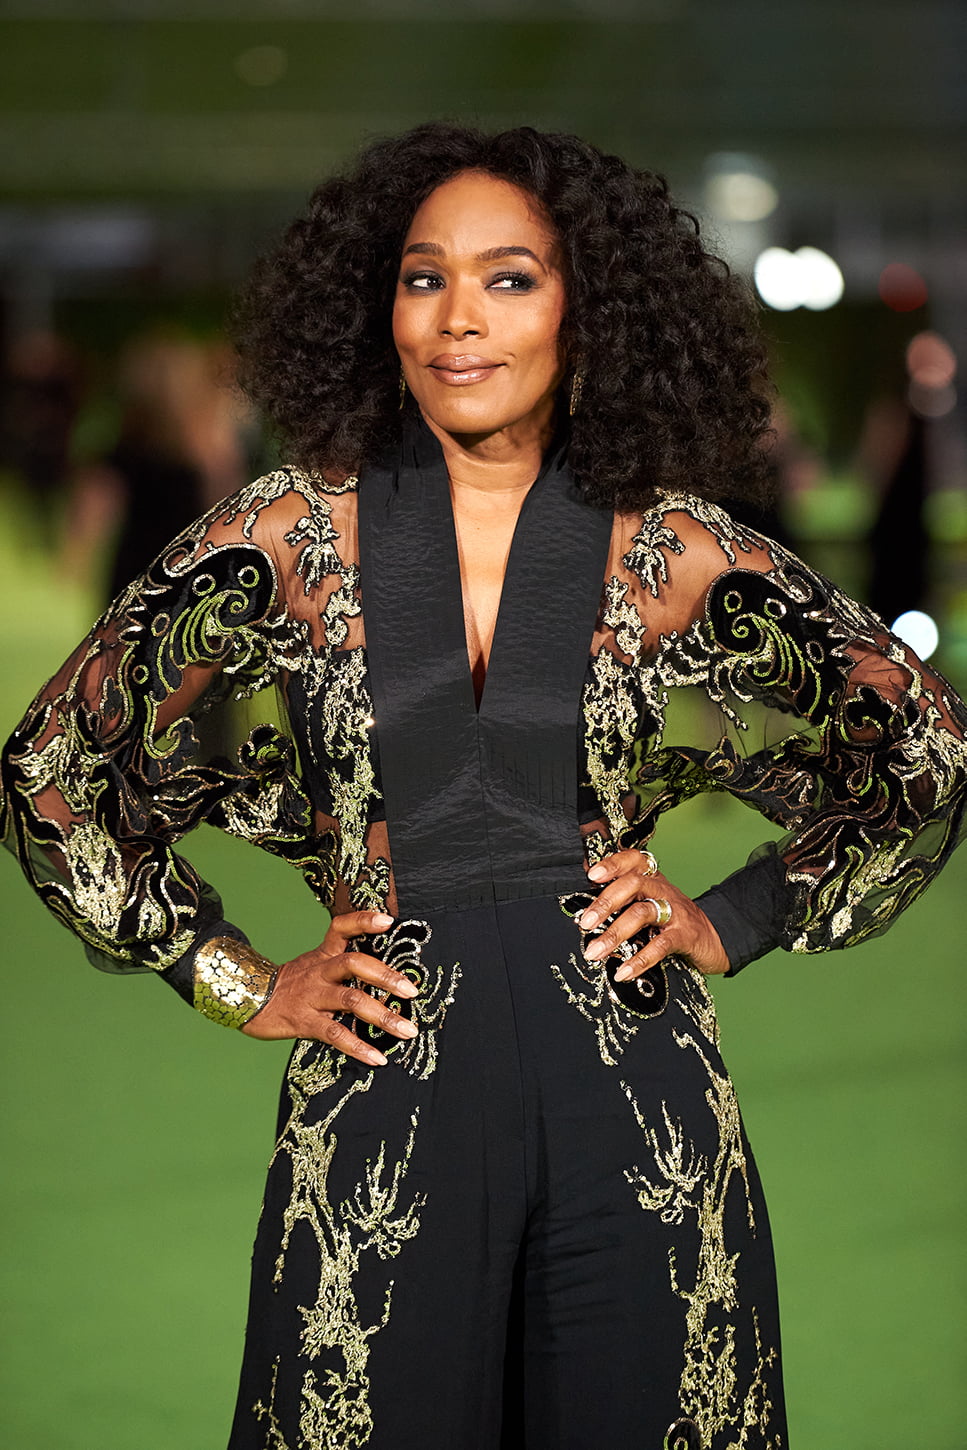 Angela Bassett attends the Academy Museum of Motion Pictures Opening Gala, September 25, 2021